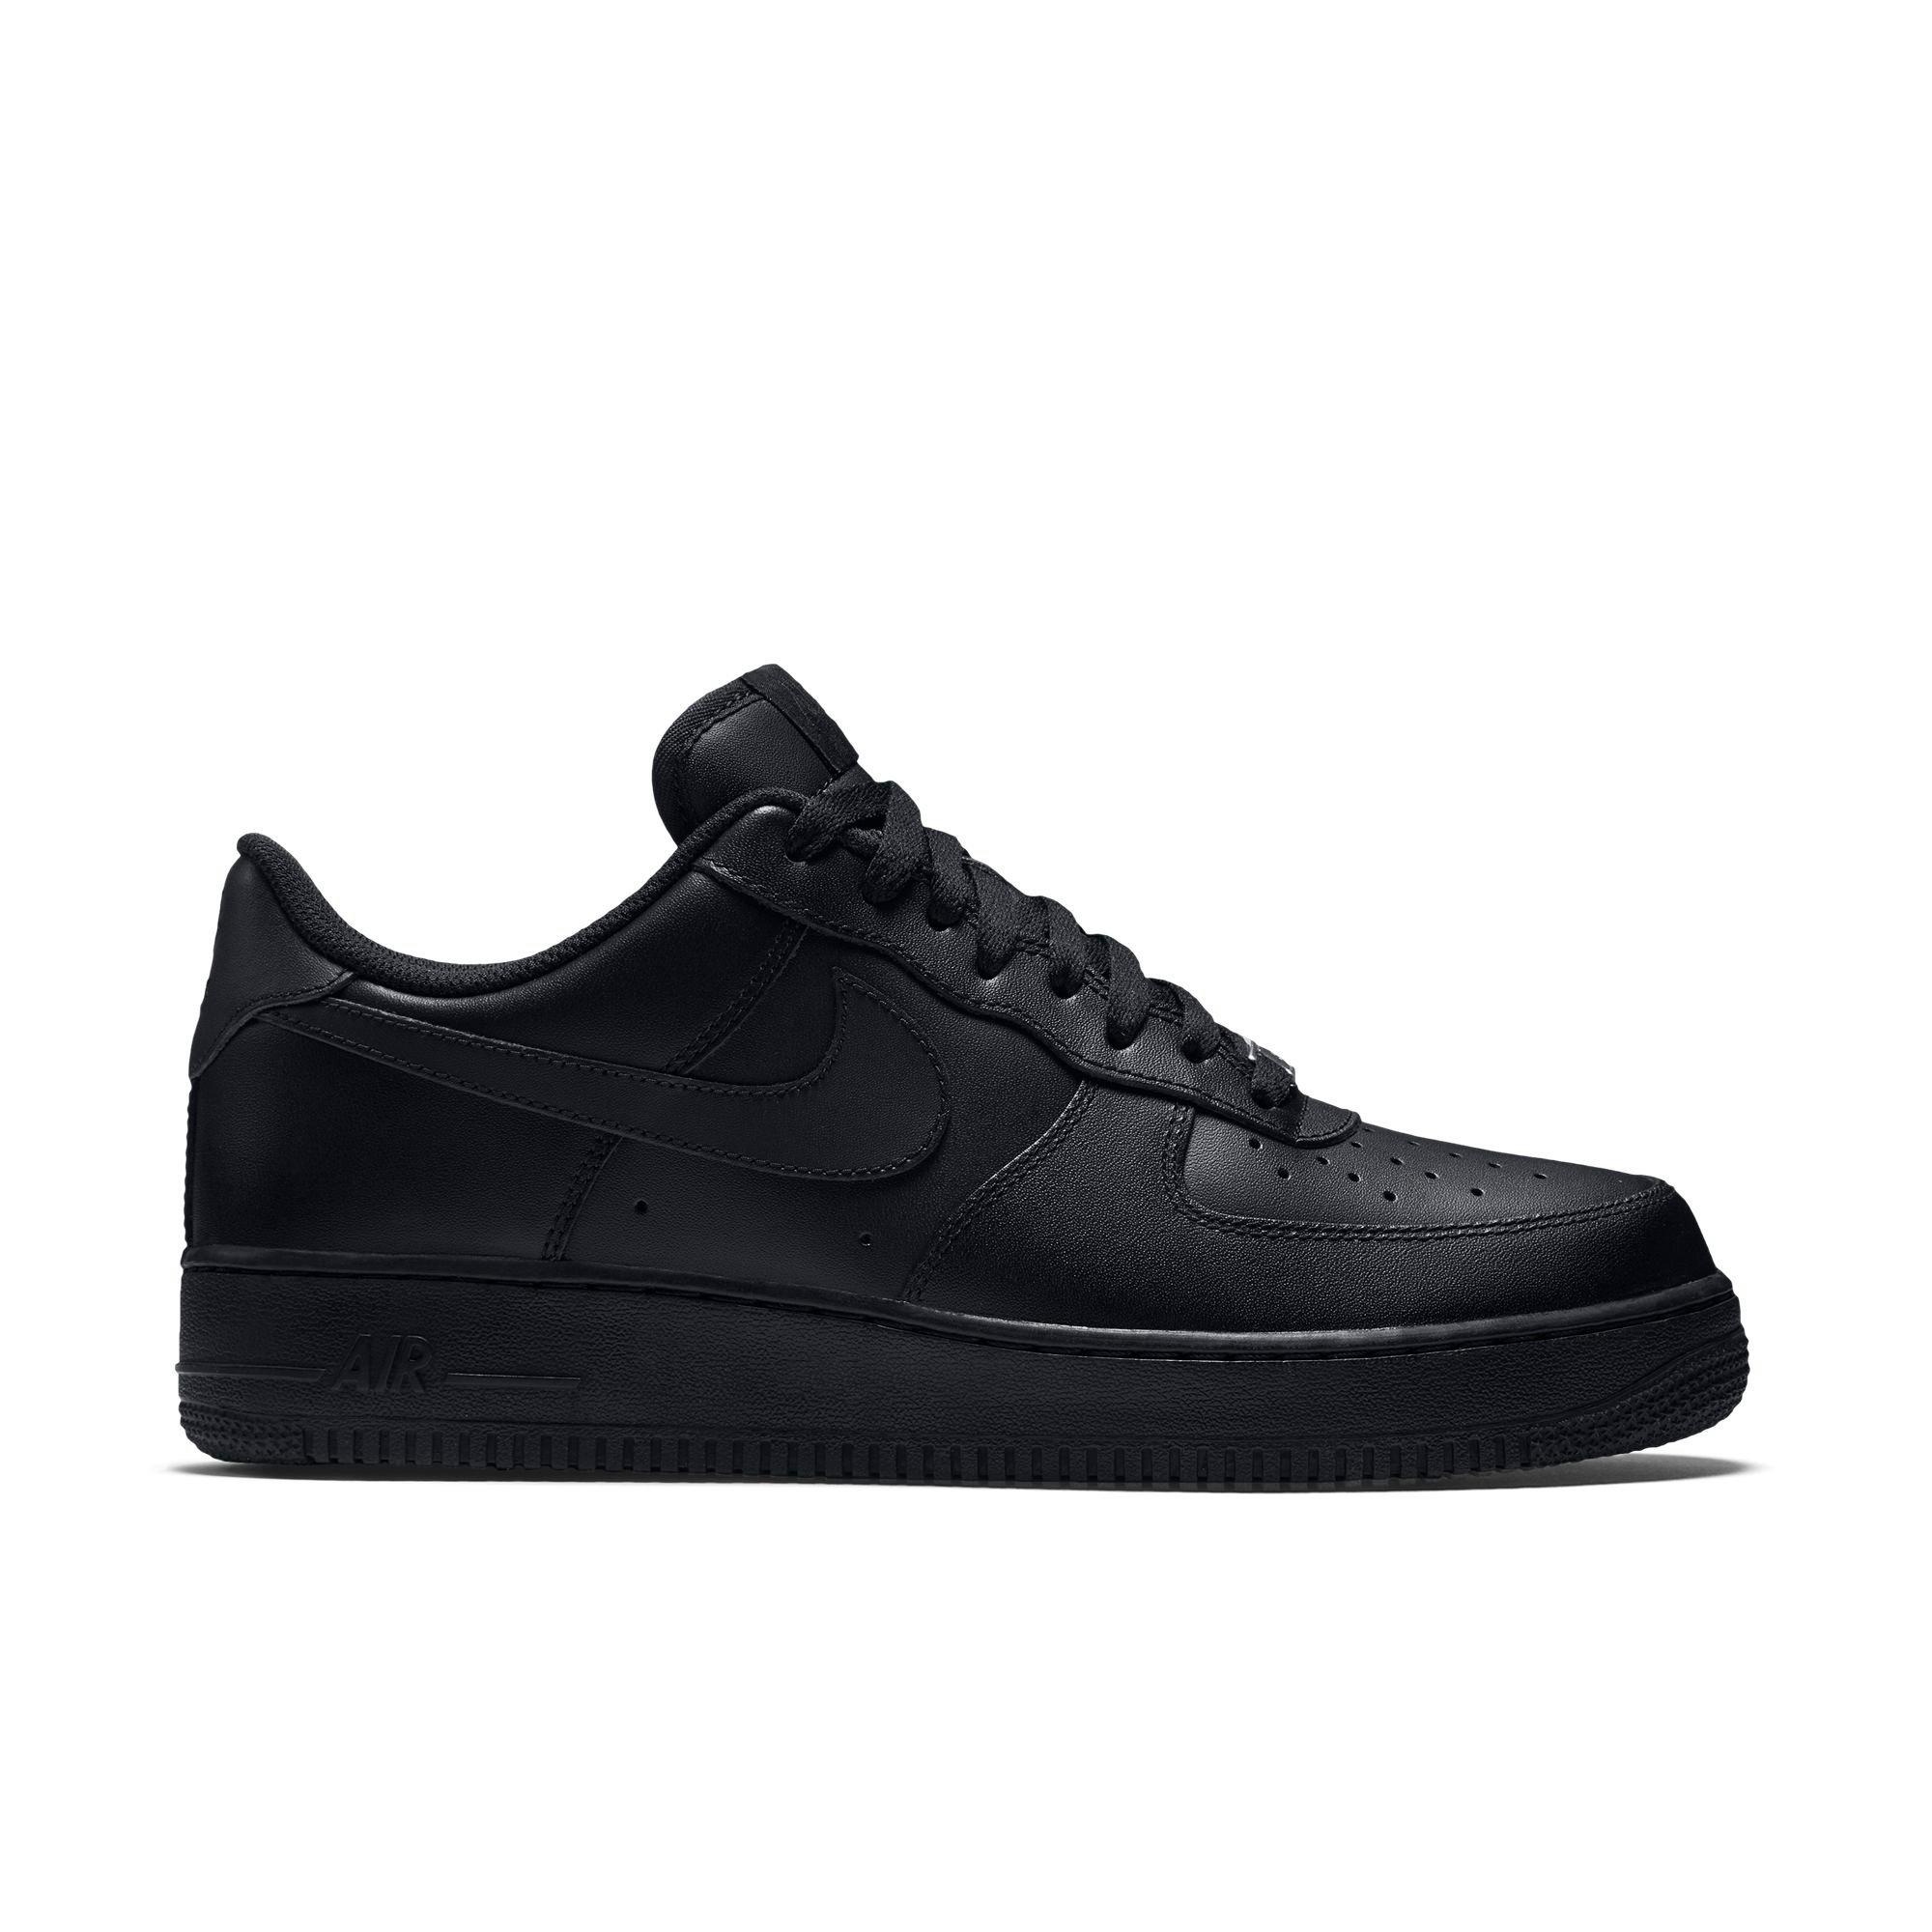 nike air force one weight